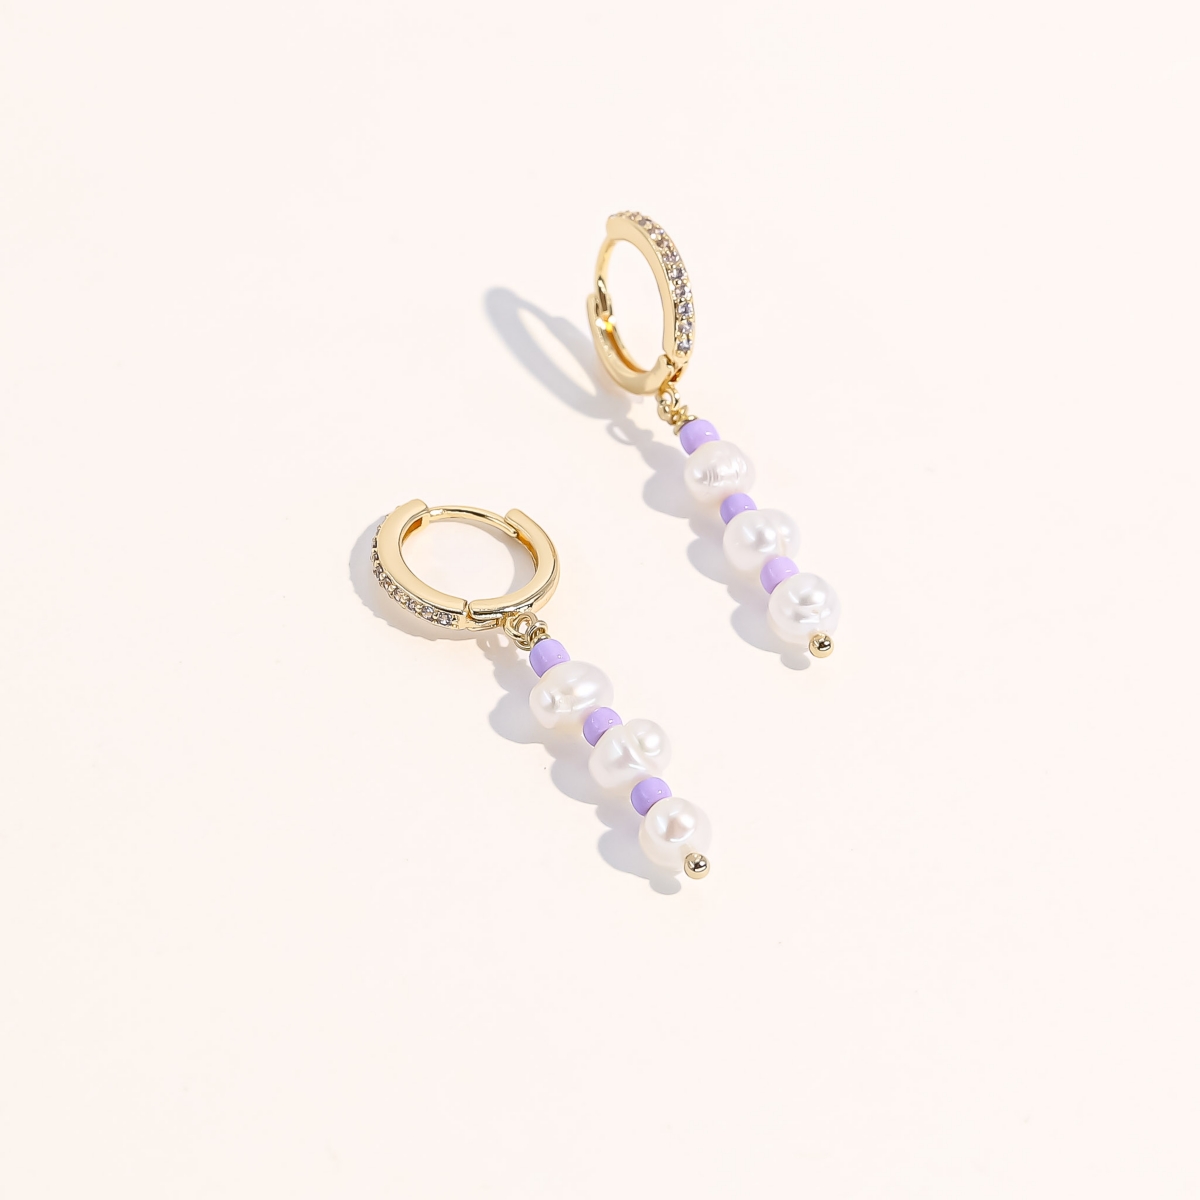 JOEY BABY 18K GOLD PLATED FRESHWATER PEARLS WITH PURPLE GLASS BEADS - TARO EARRINGS FOR WOMEN